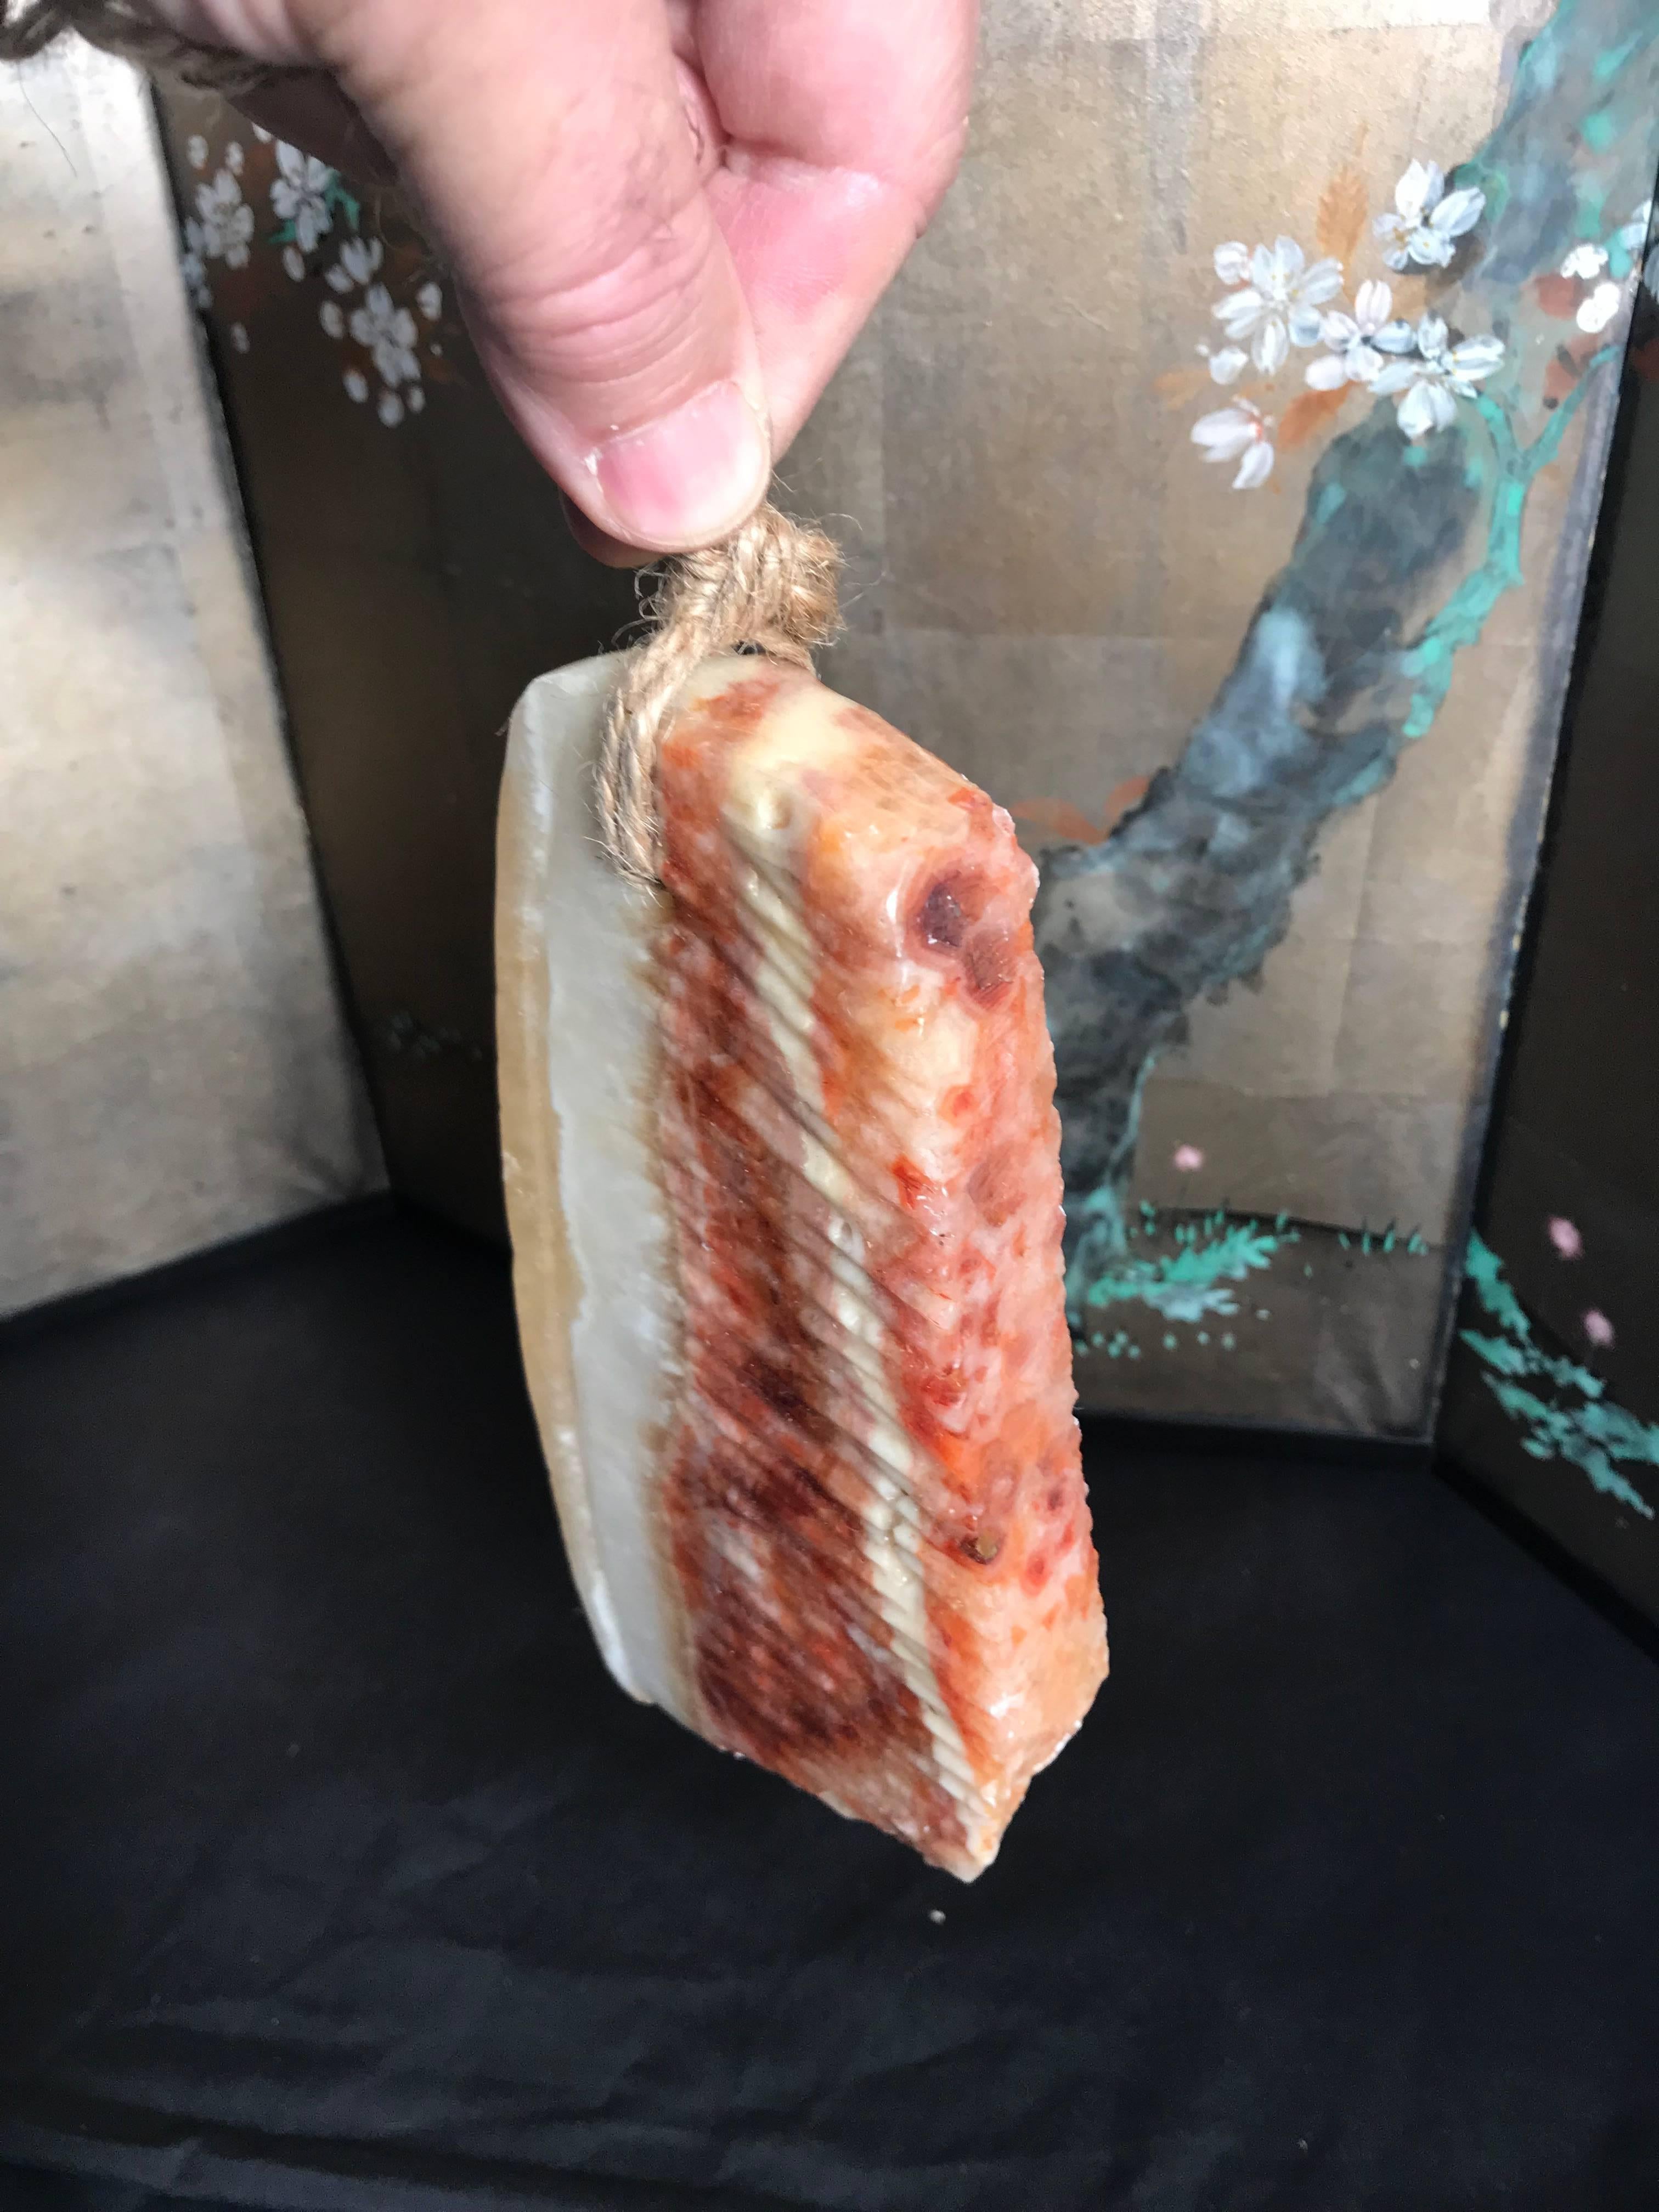 Here is an authentic example of a Chinese food stone (Shiwu) which imitates a real slice of meat.

Each piece is actually a found stone that resembles a thick cut of beef or pork. 

A fantastic natural stone, meat or food these stones are widely